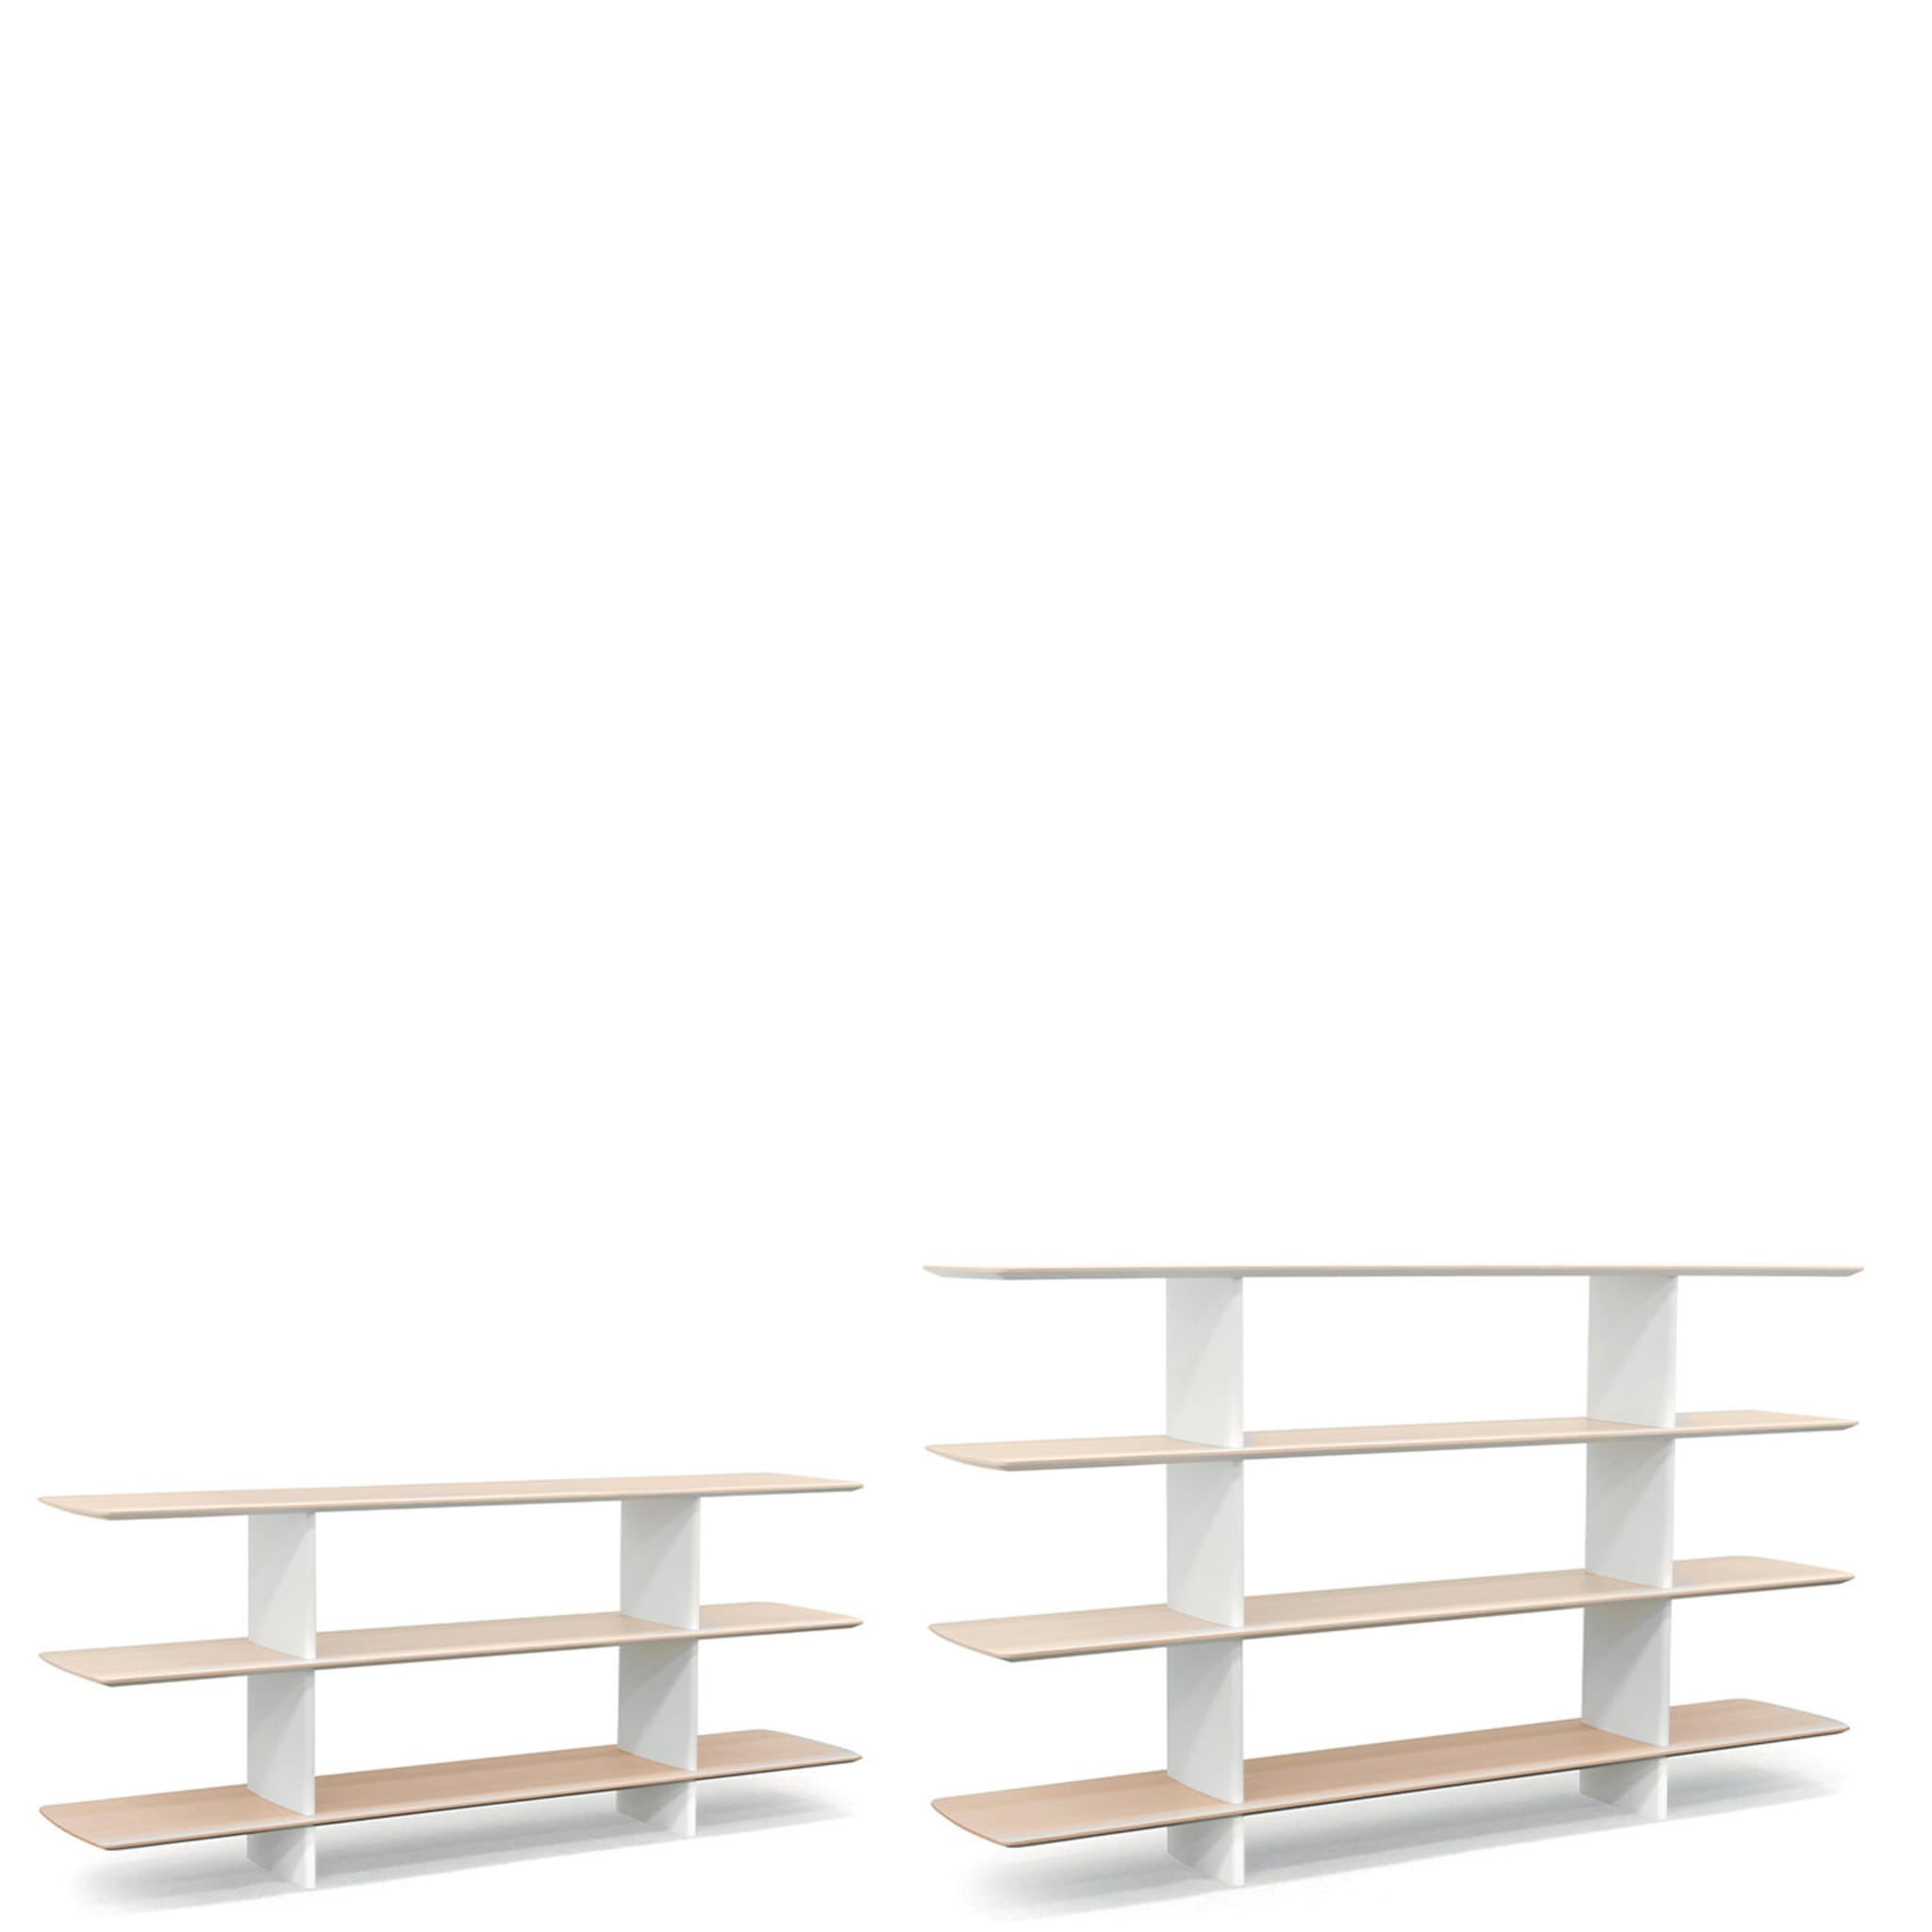 Shift White and Durmast 4-Shelf Bookcase by Foster + Partners - Alternative view 2